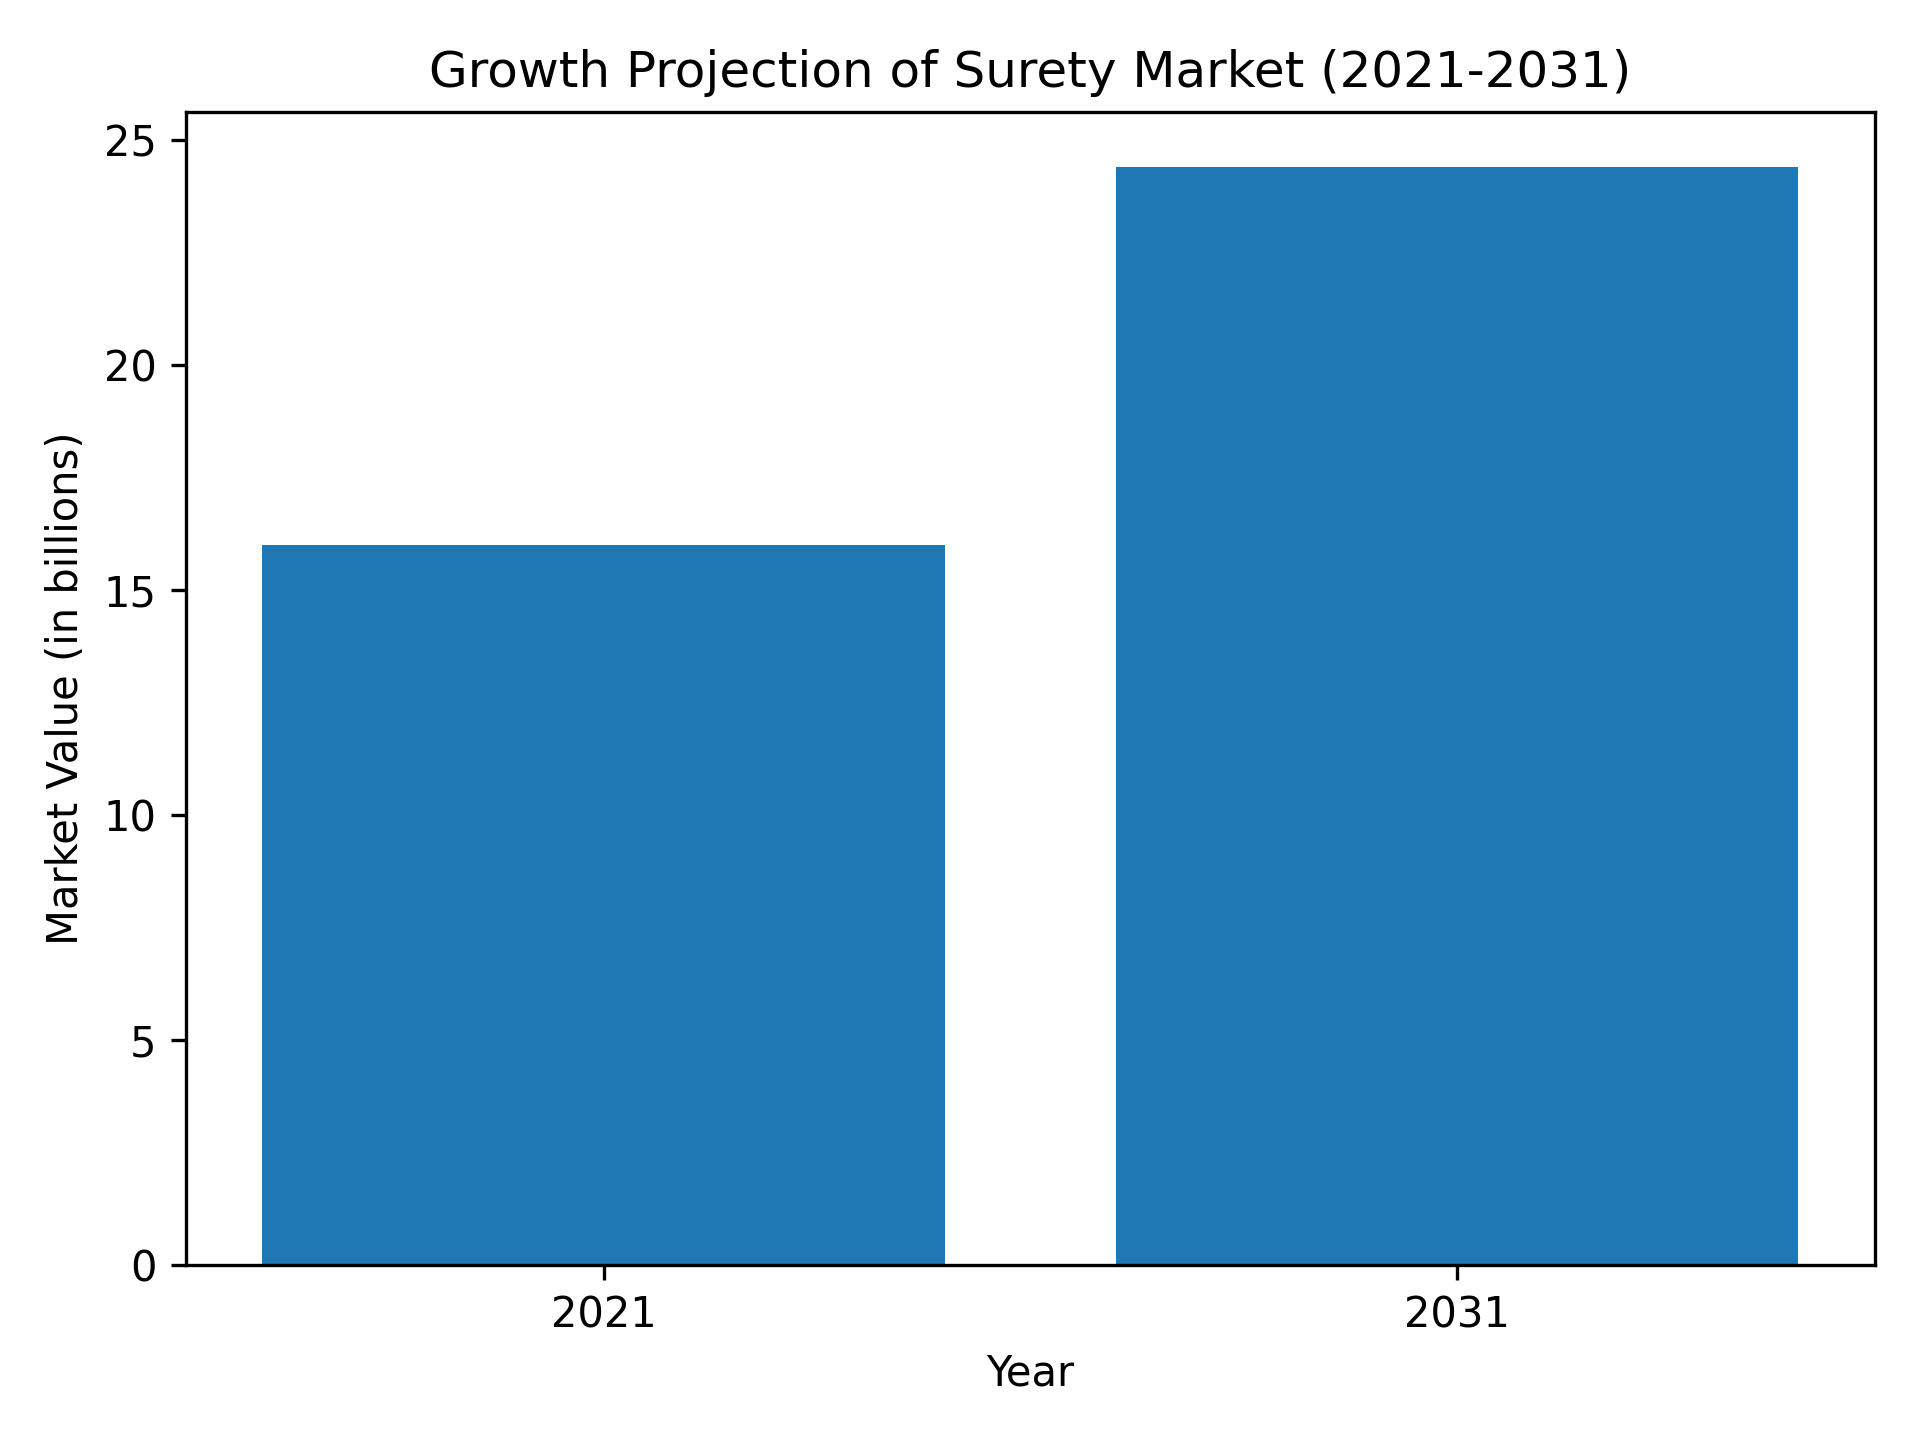 Potential Growth of Surety Bonds from 2021 to 2031